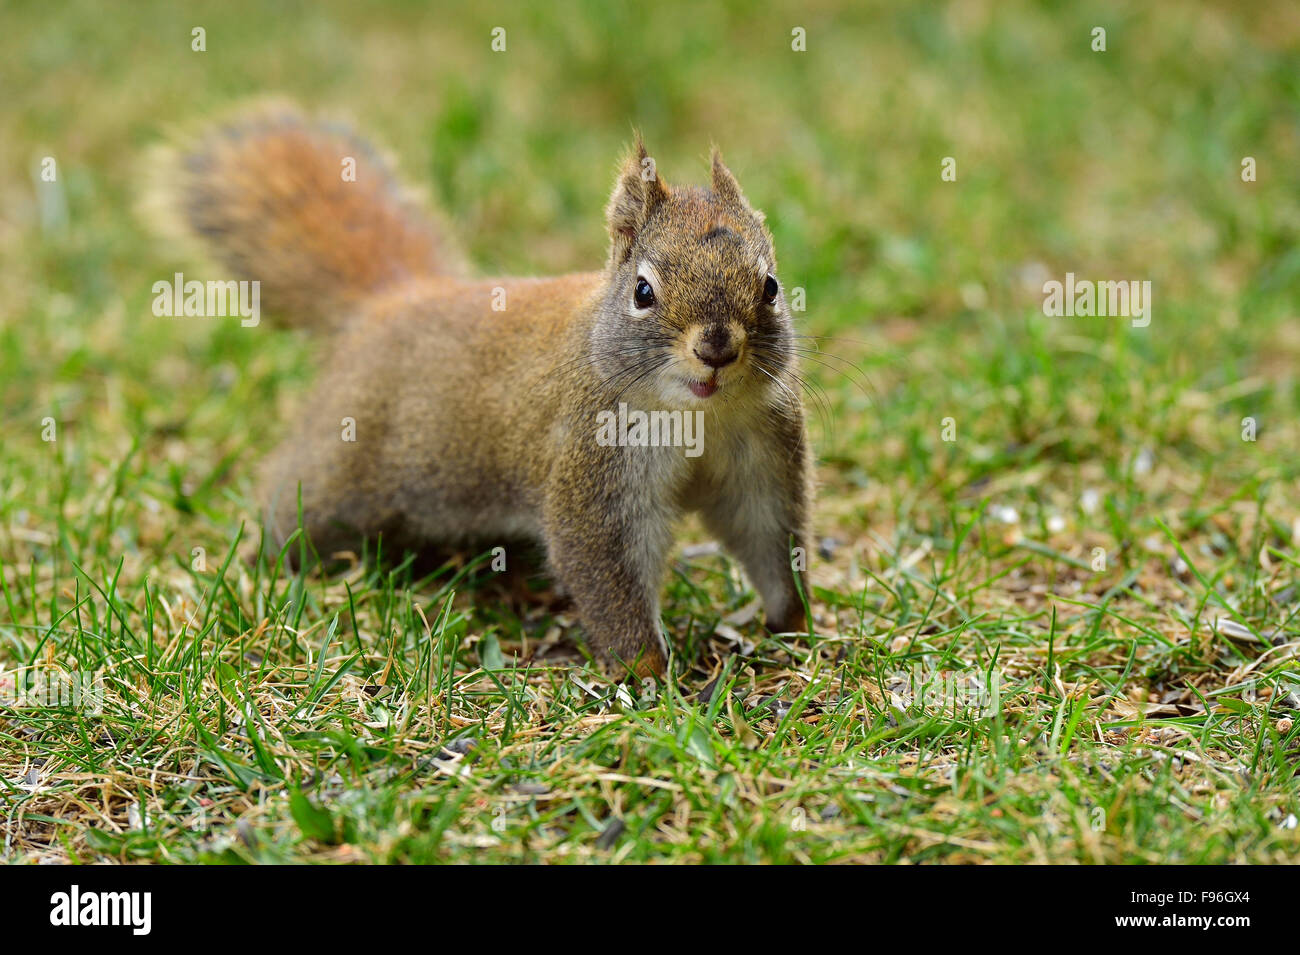 An image of a red squirrel, Tamiasciurus hudsonicus,  on green grass in Alberta Canada. Stock Photo